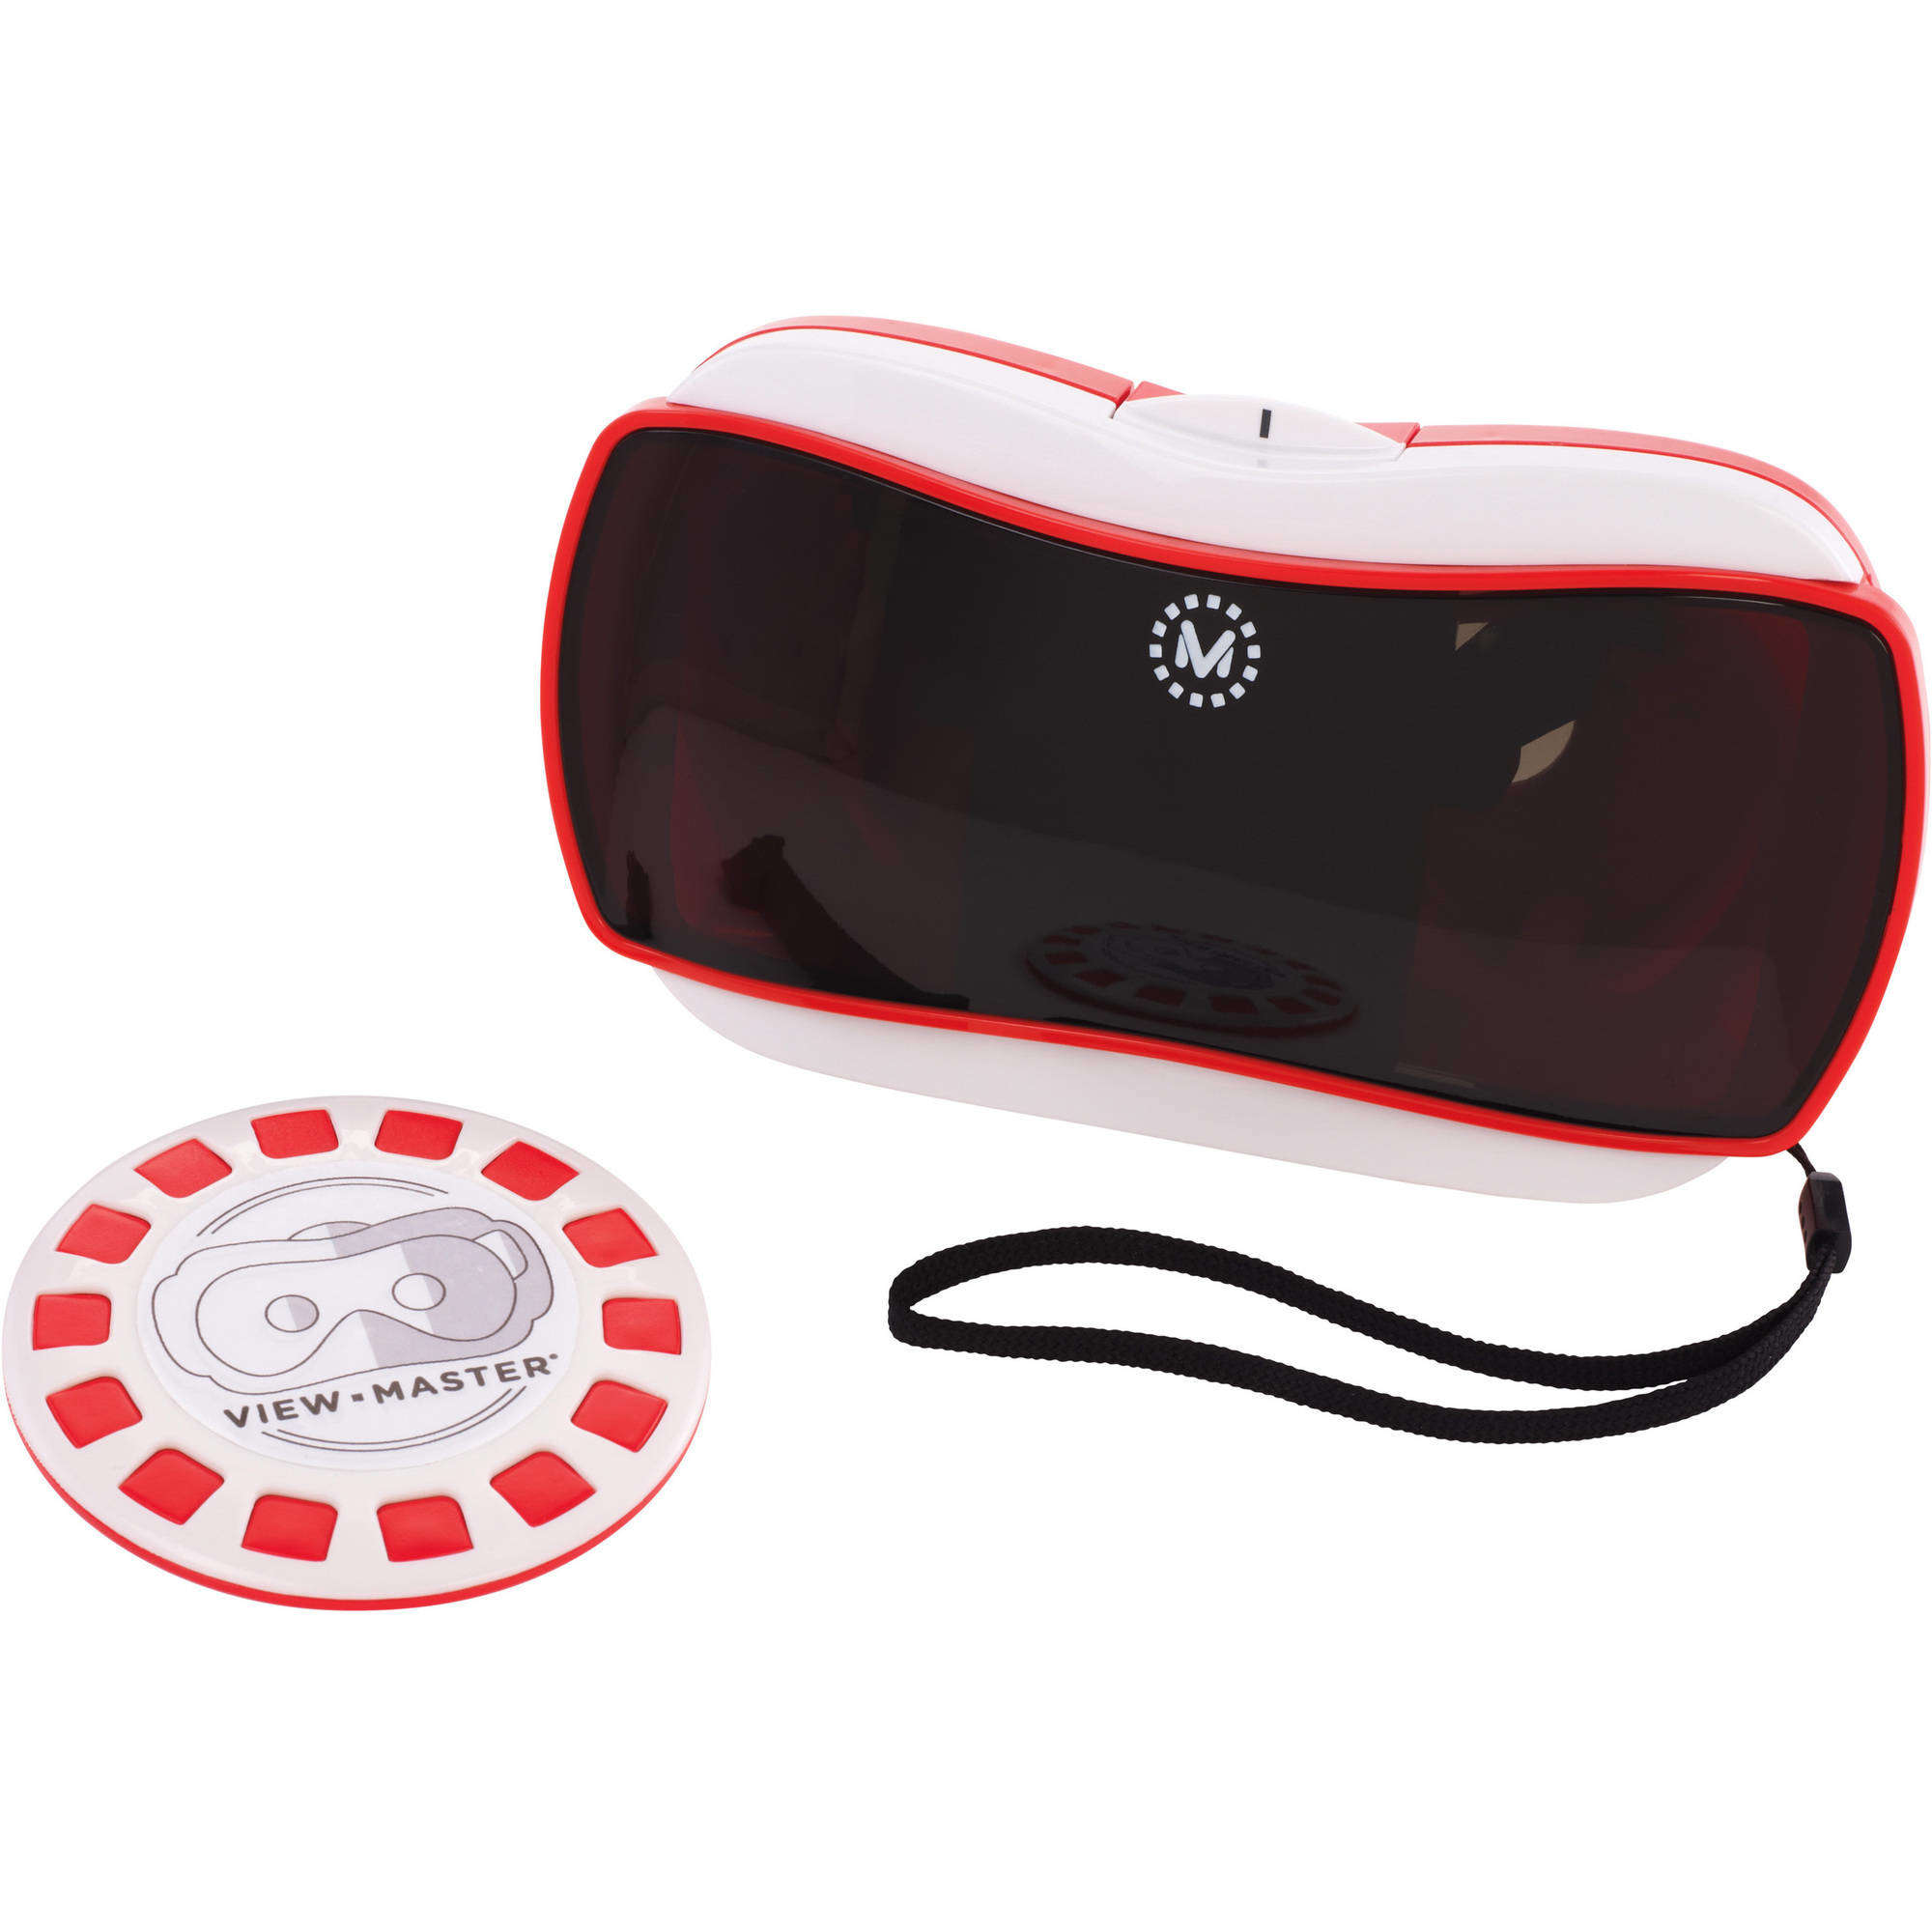 View-Master Virtual Reality Starter Pack - image 1 of 21